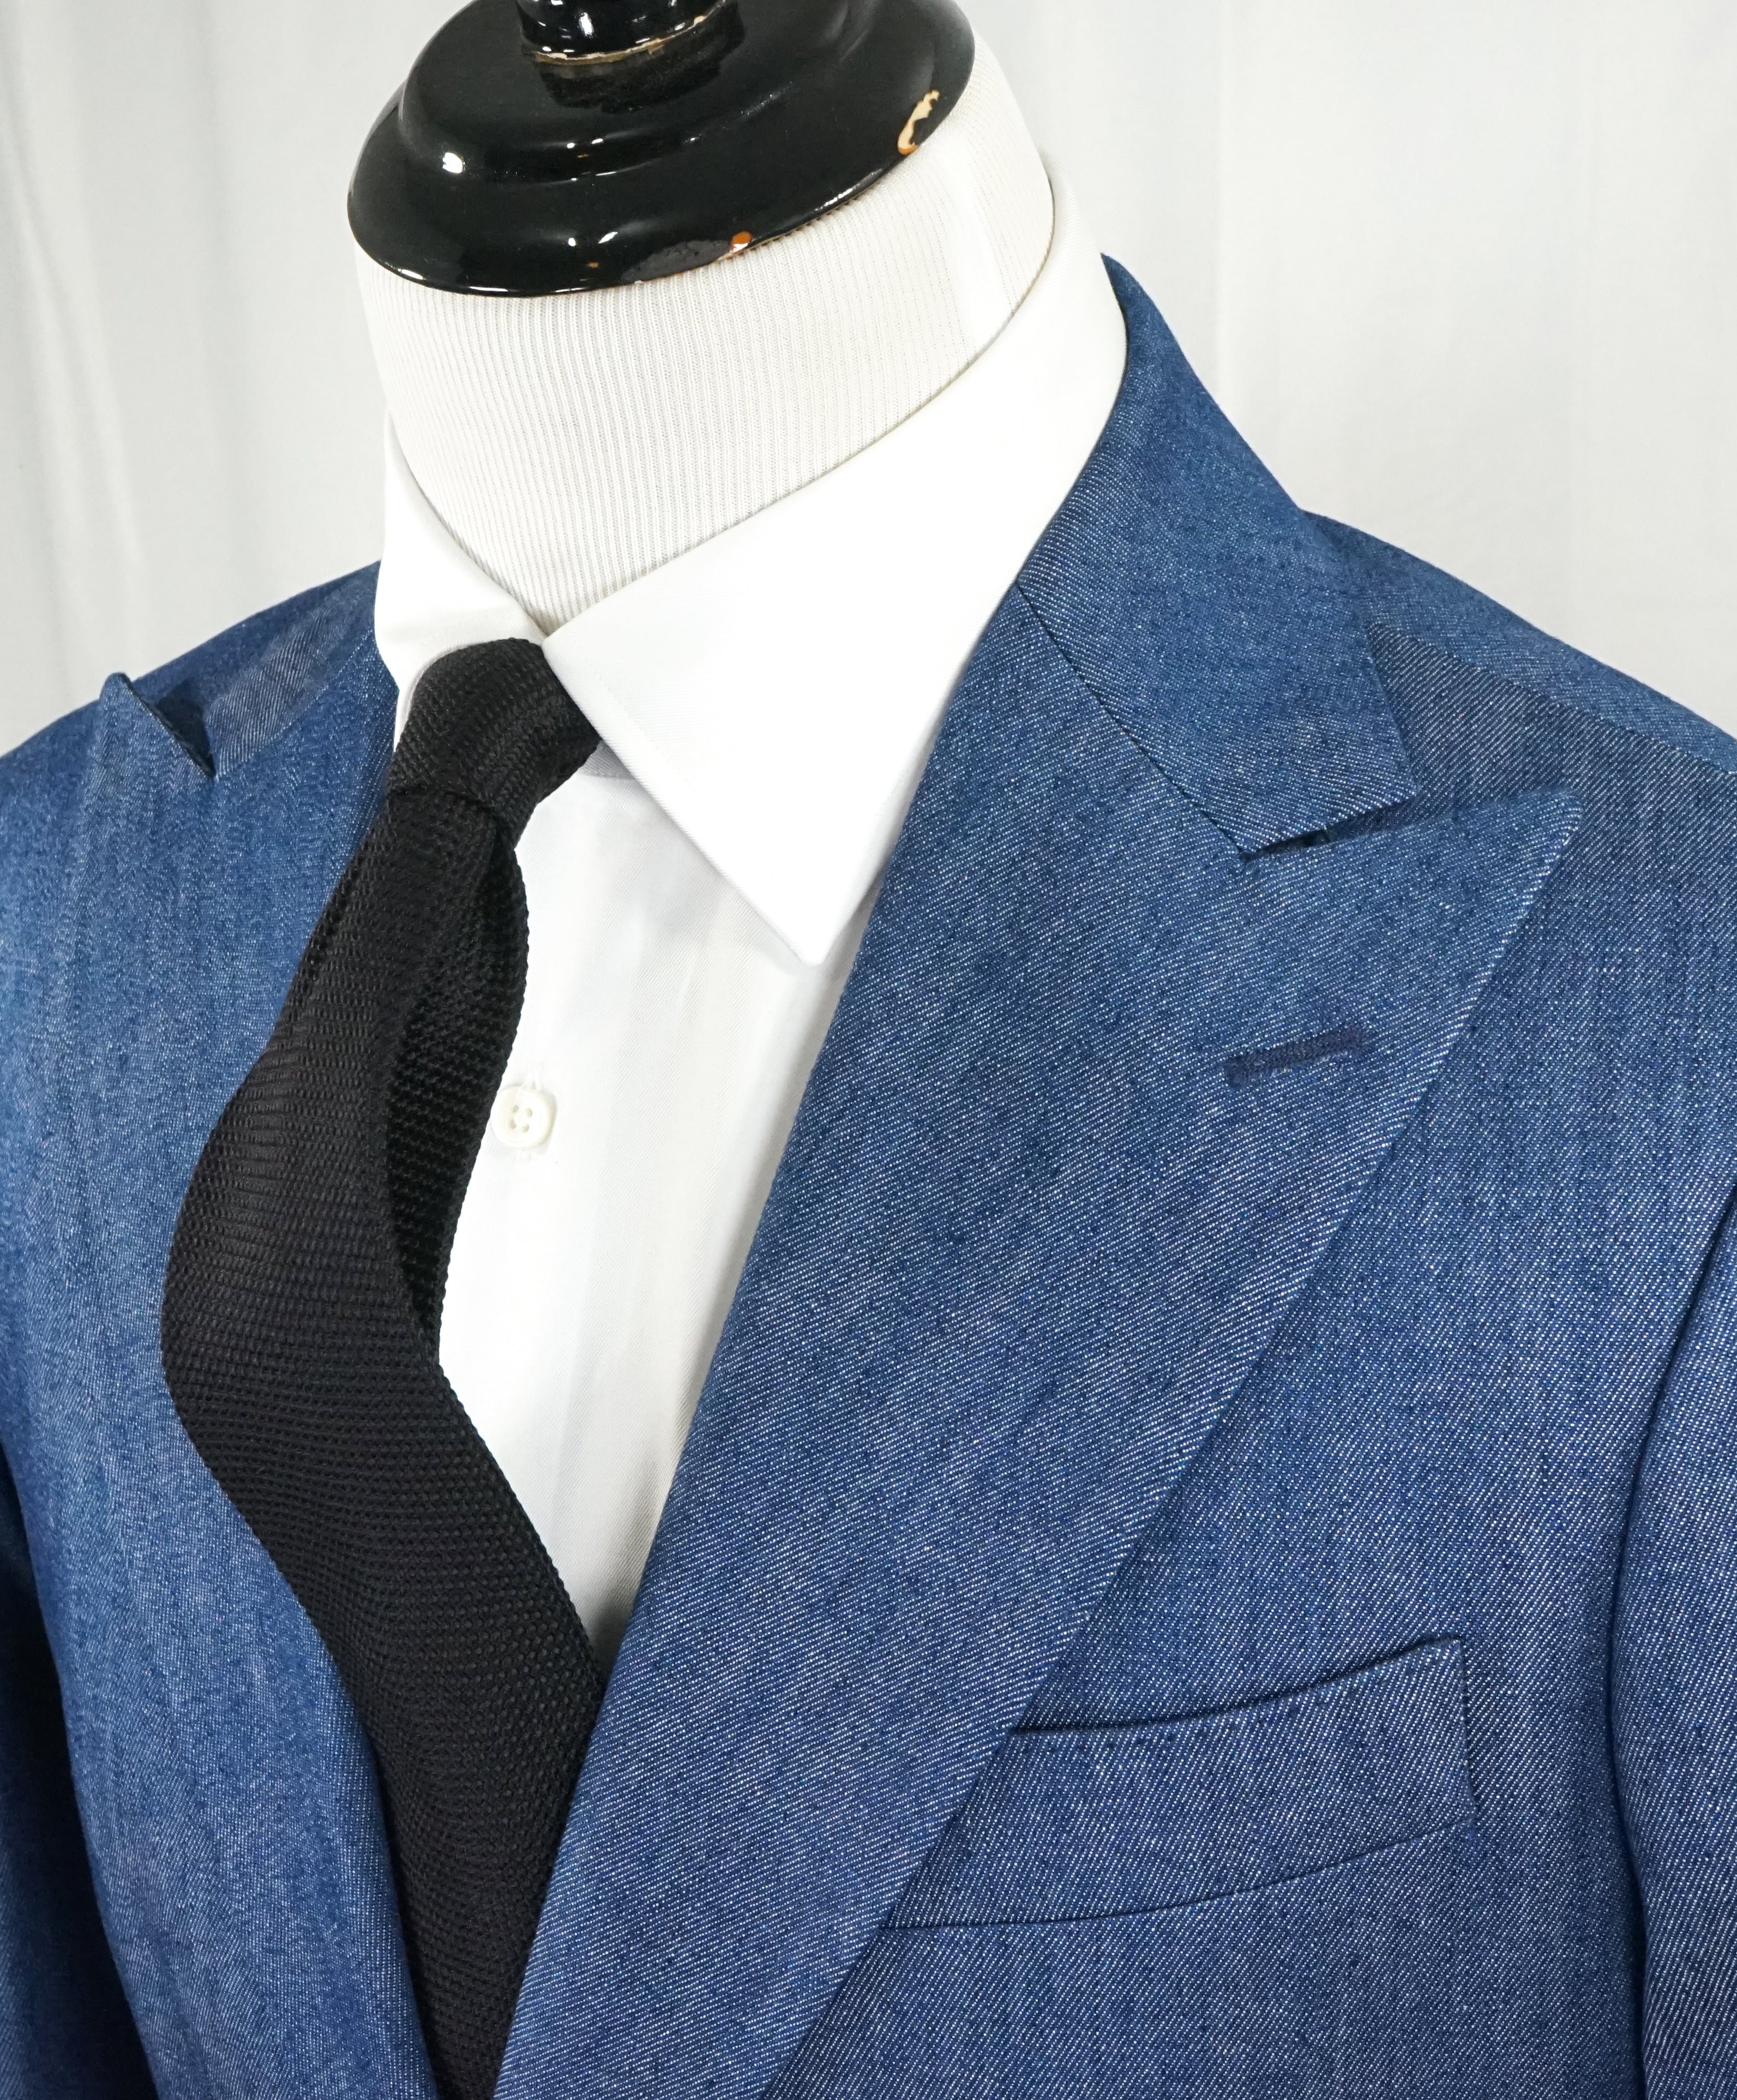 ABC M2- Wide Peak Lapel Made In Italy Denim Tom Ford Style Suit - 42R ...